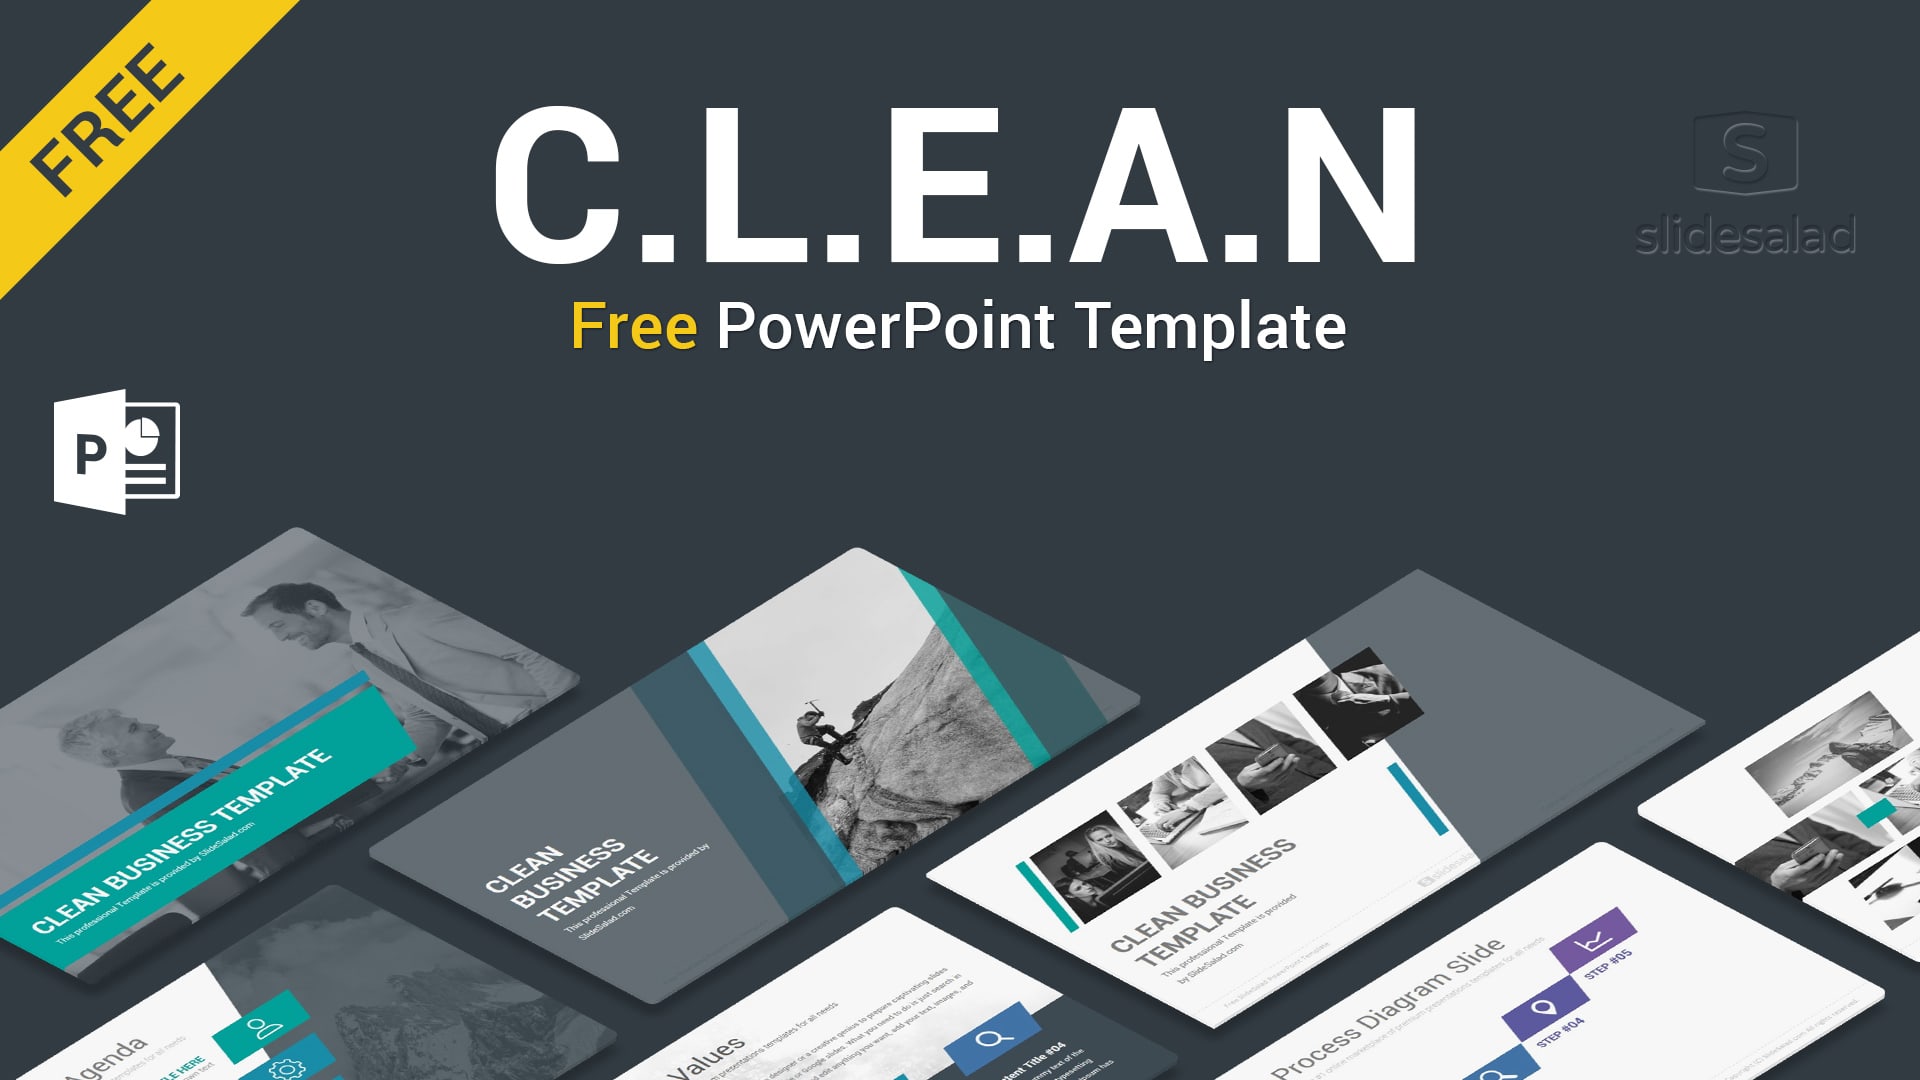 Clean Free PowerPoint Template - Free Download